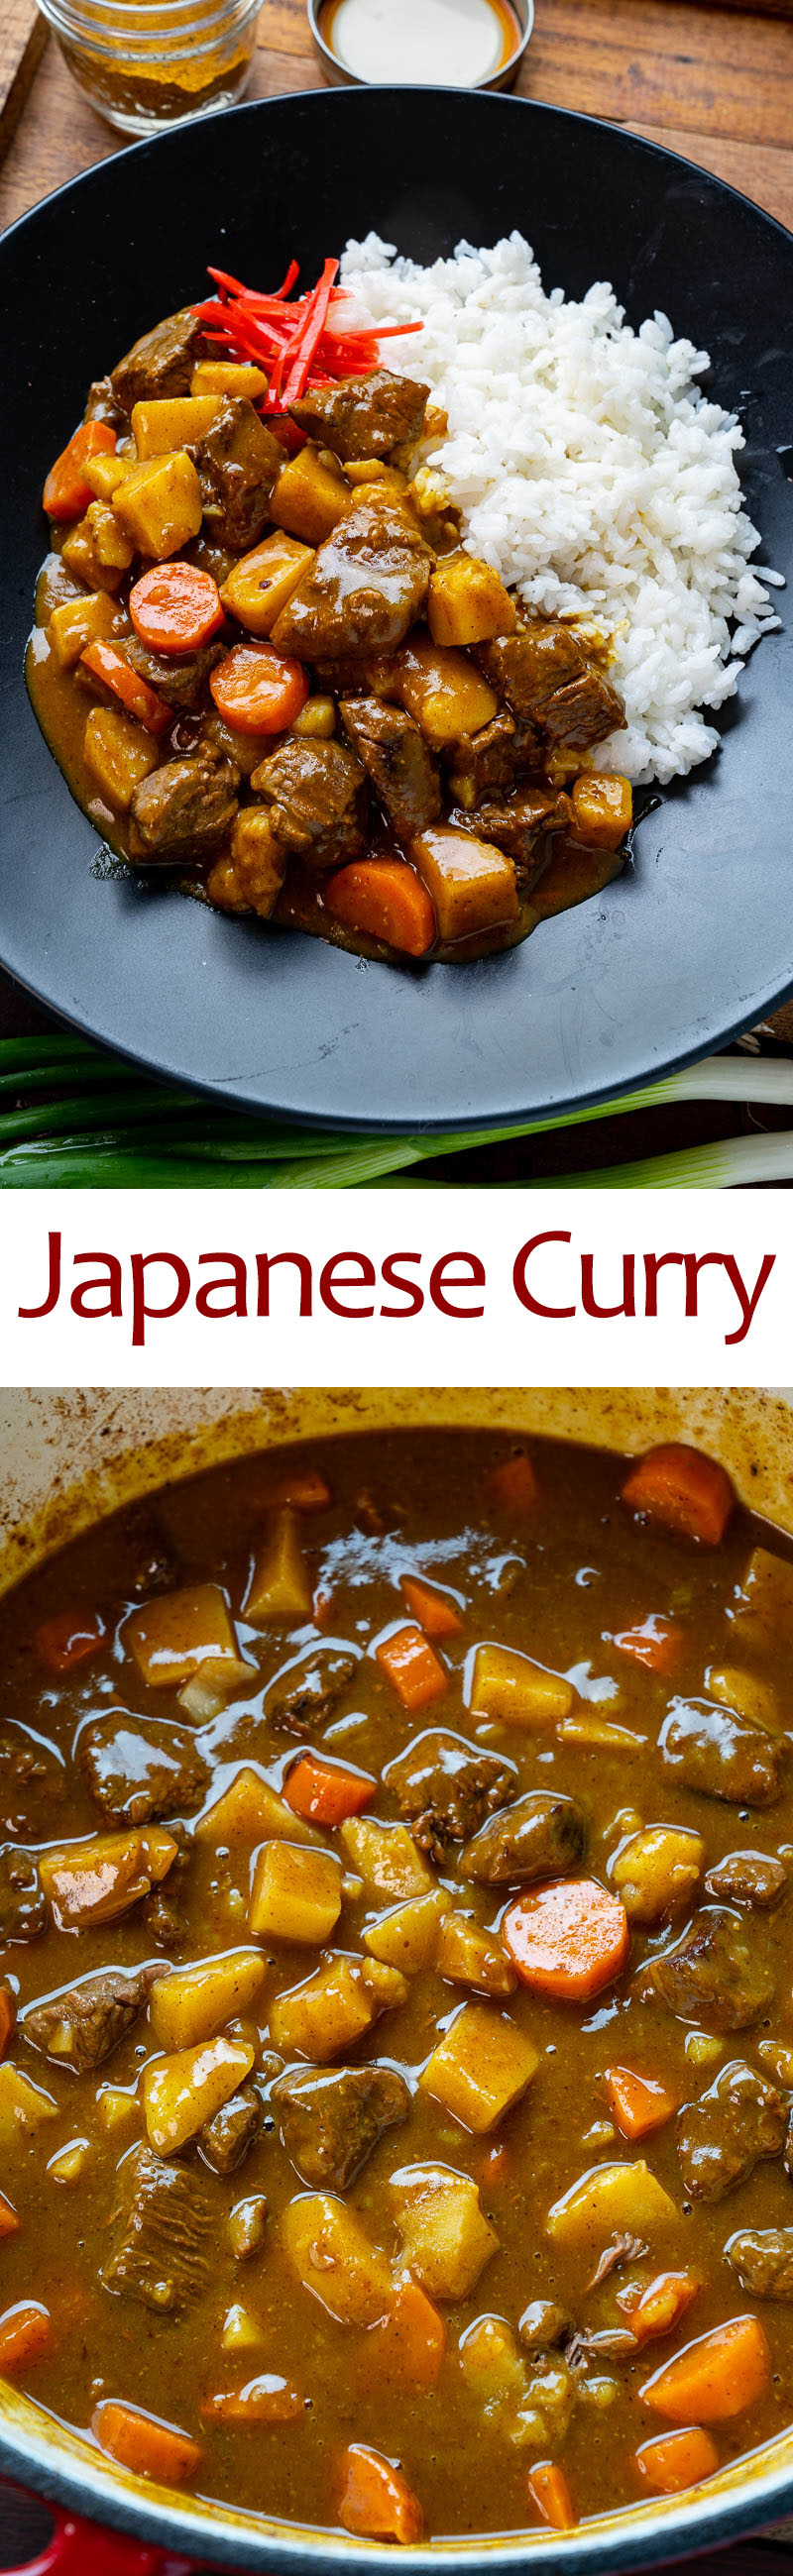 Japanese Curry (Kare)